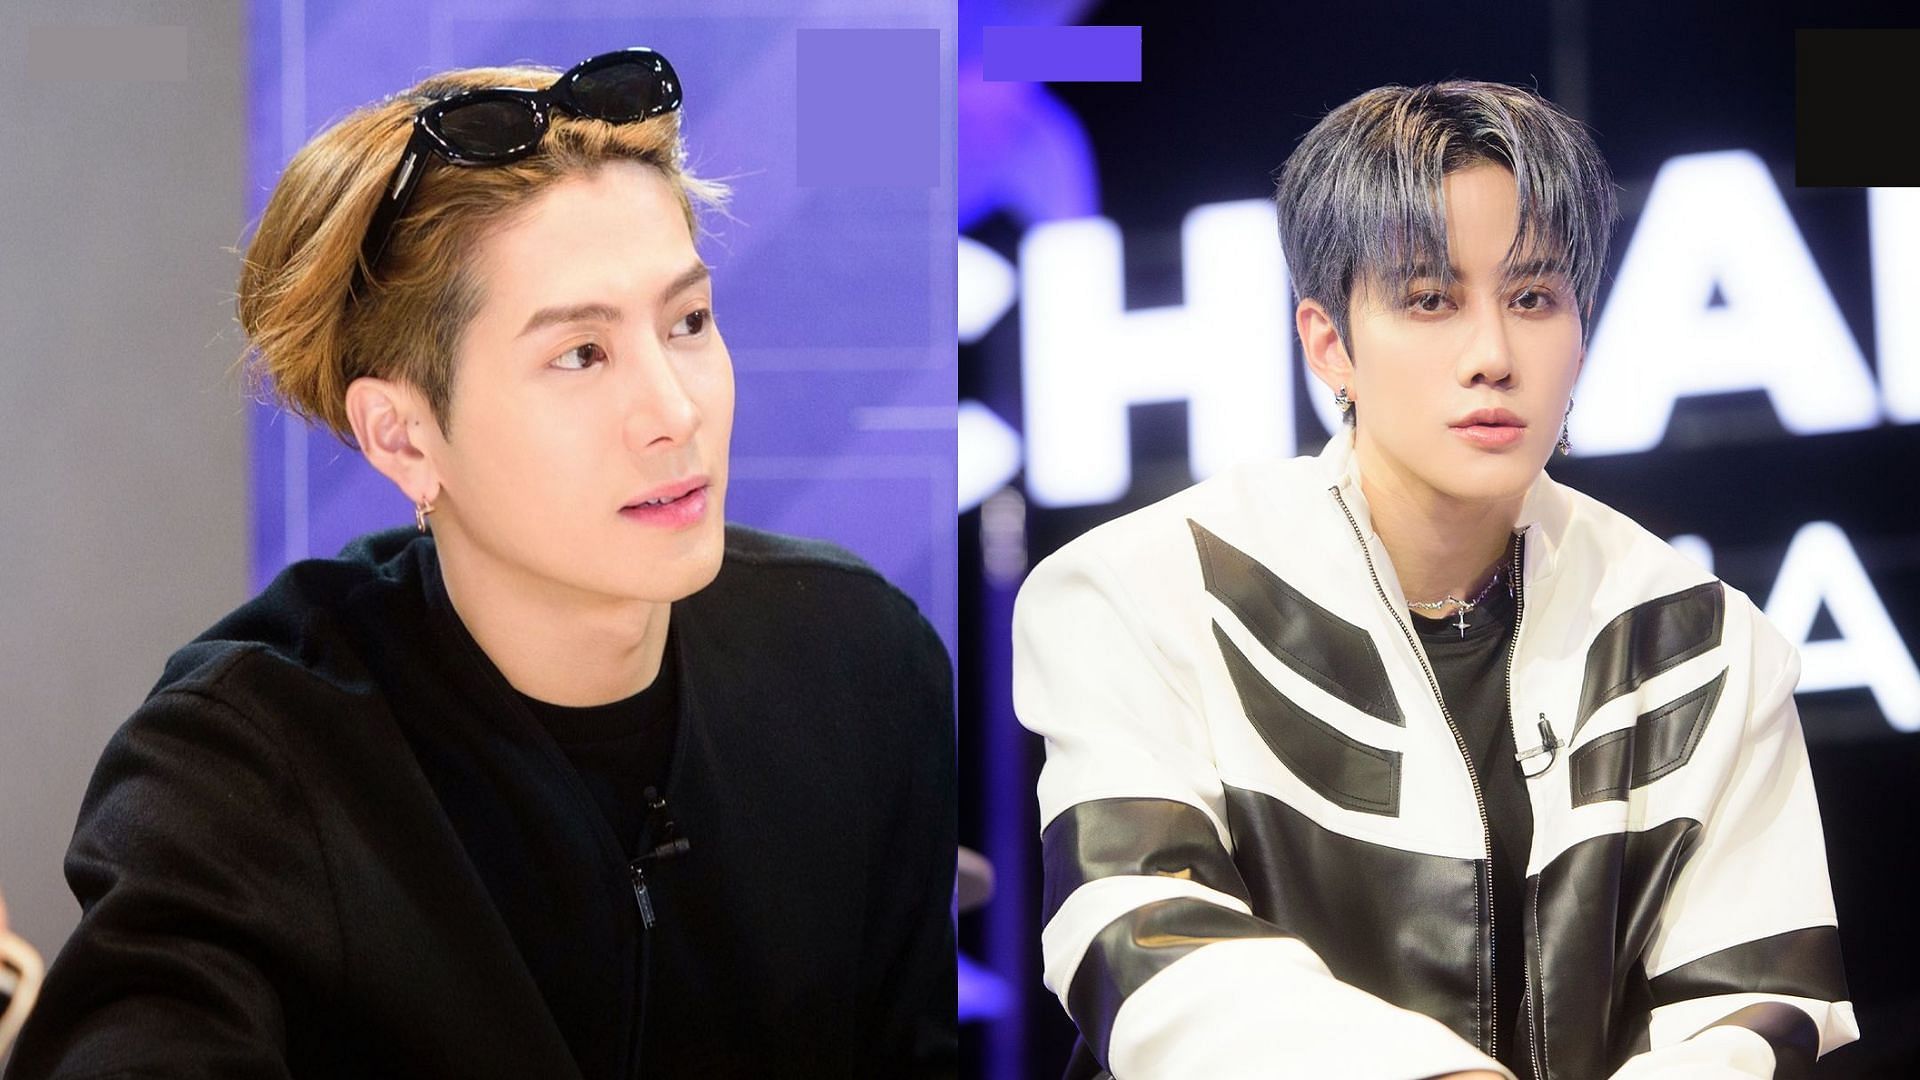 Jackson Wang and Mike Angelo caught up in a hilarious mix-up (Images via Instagram/chuang.asia)